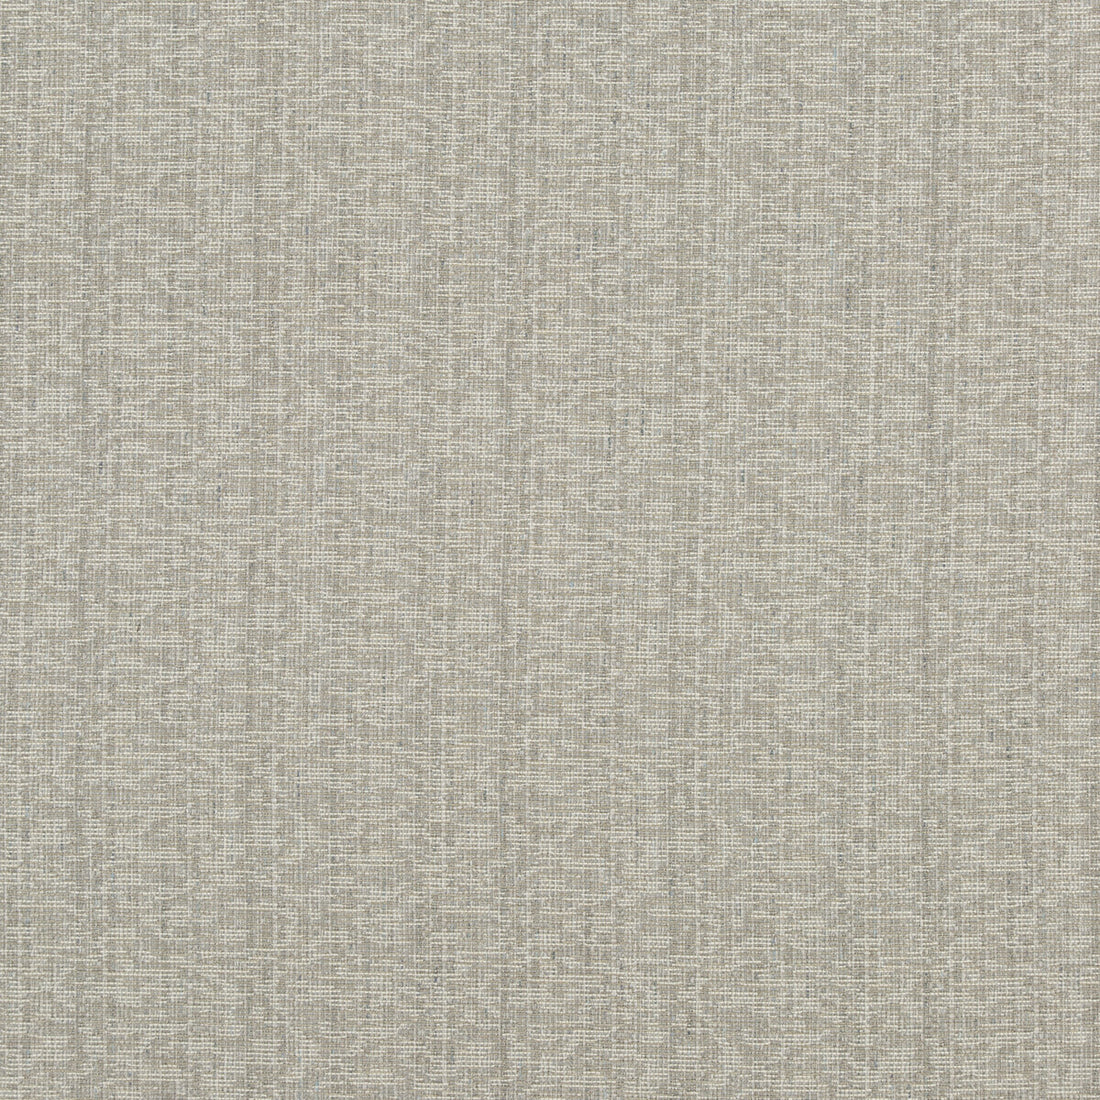 Camina fabric in dove grey color - pattern BF10726.910.0 - by G P &amp; J Baker in the Essential Colours II collection